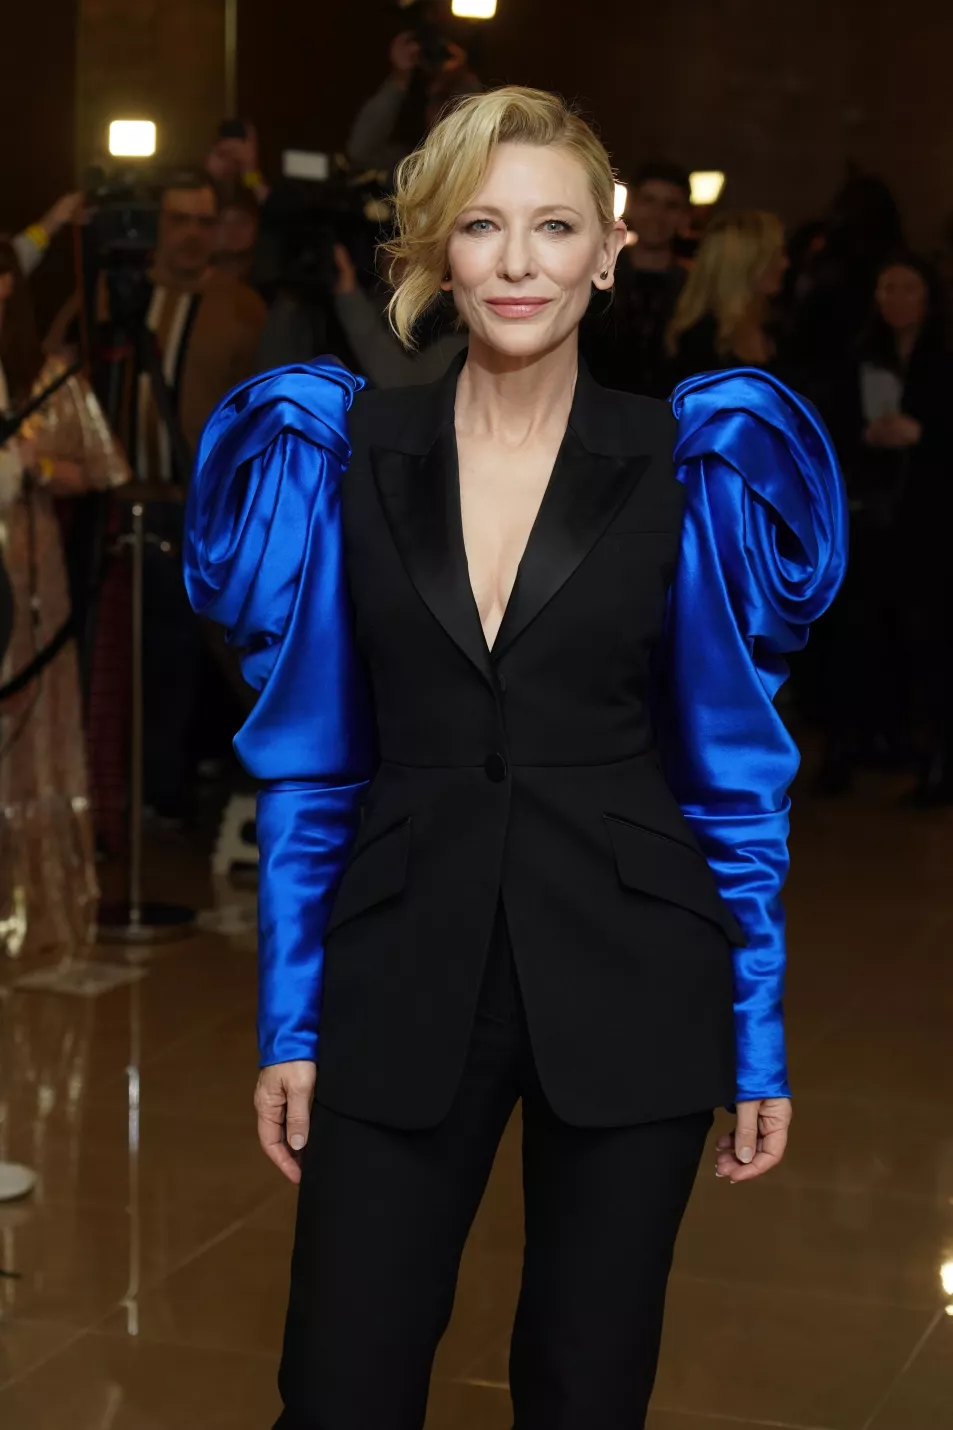 From Paul Mescal to Cate Blanchett: The fashion of the 2023 Oscar nominees